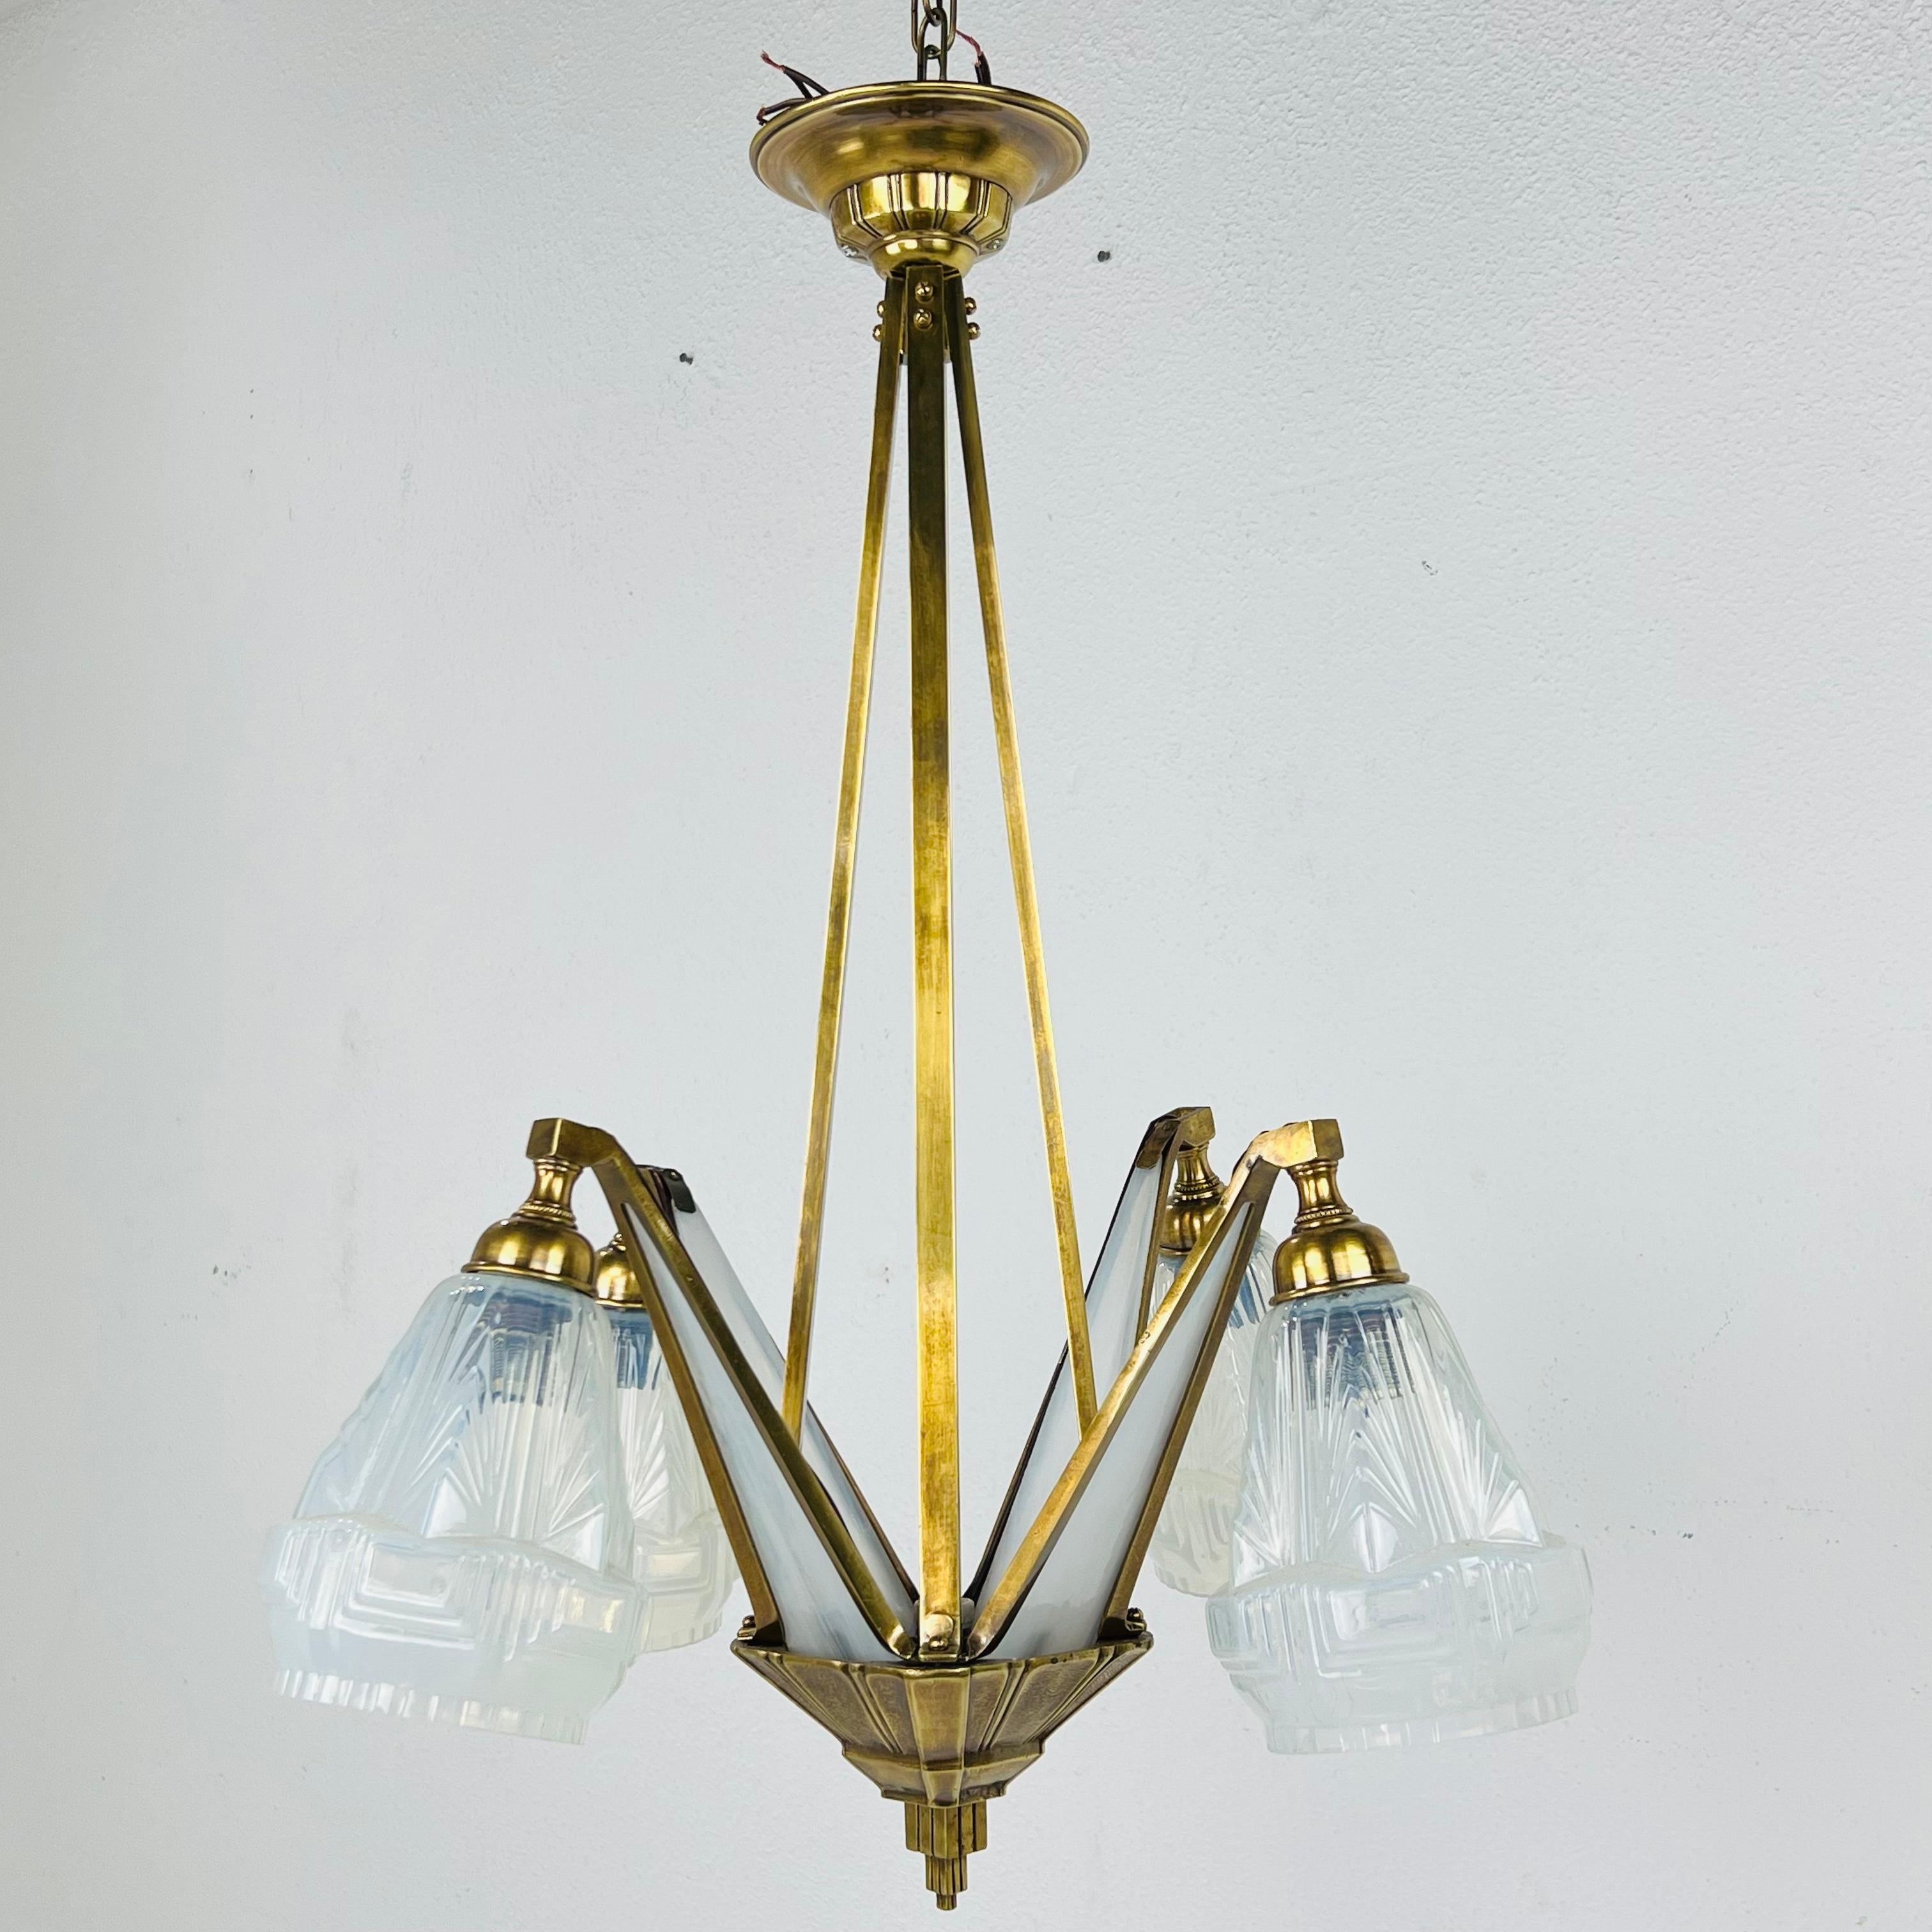 French Art Deco chandelier in style of Degues. This ceiling light is a remarkable example of the craftsmanship and style of the early 20th century. This chandelier cleverly combines metal and glass and harmoniously combines functionality and